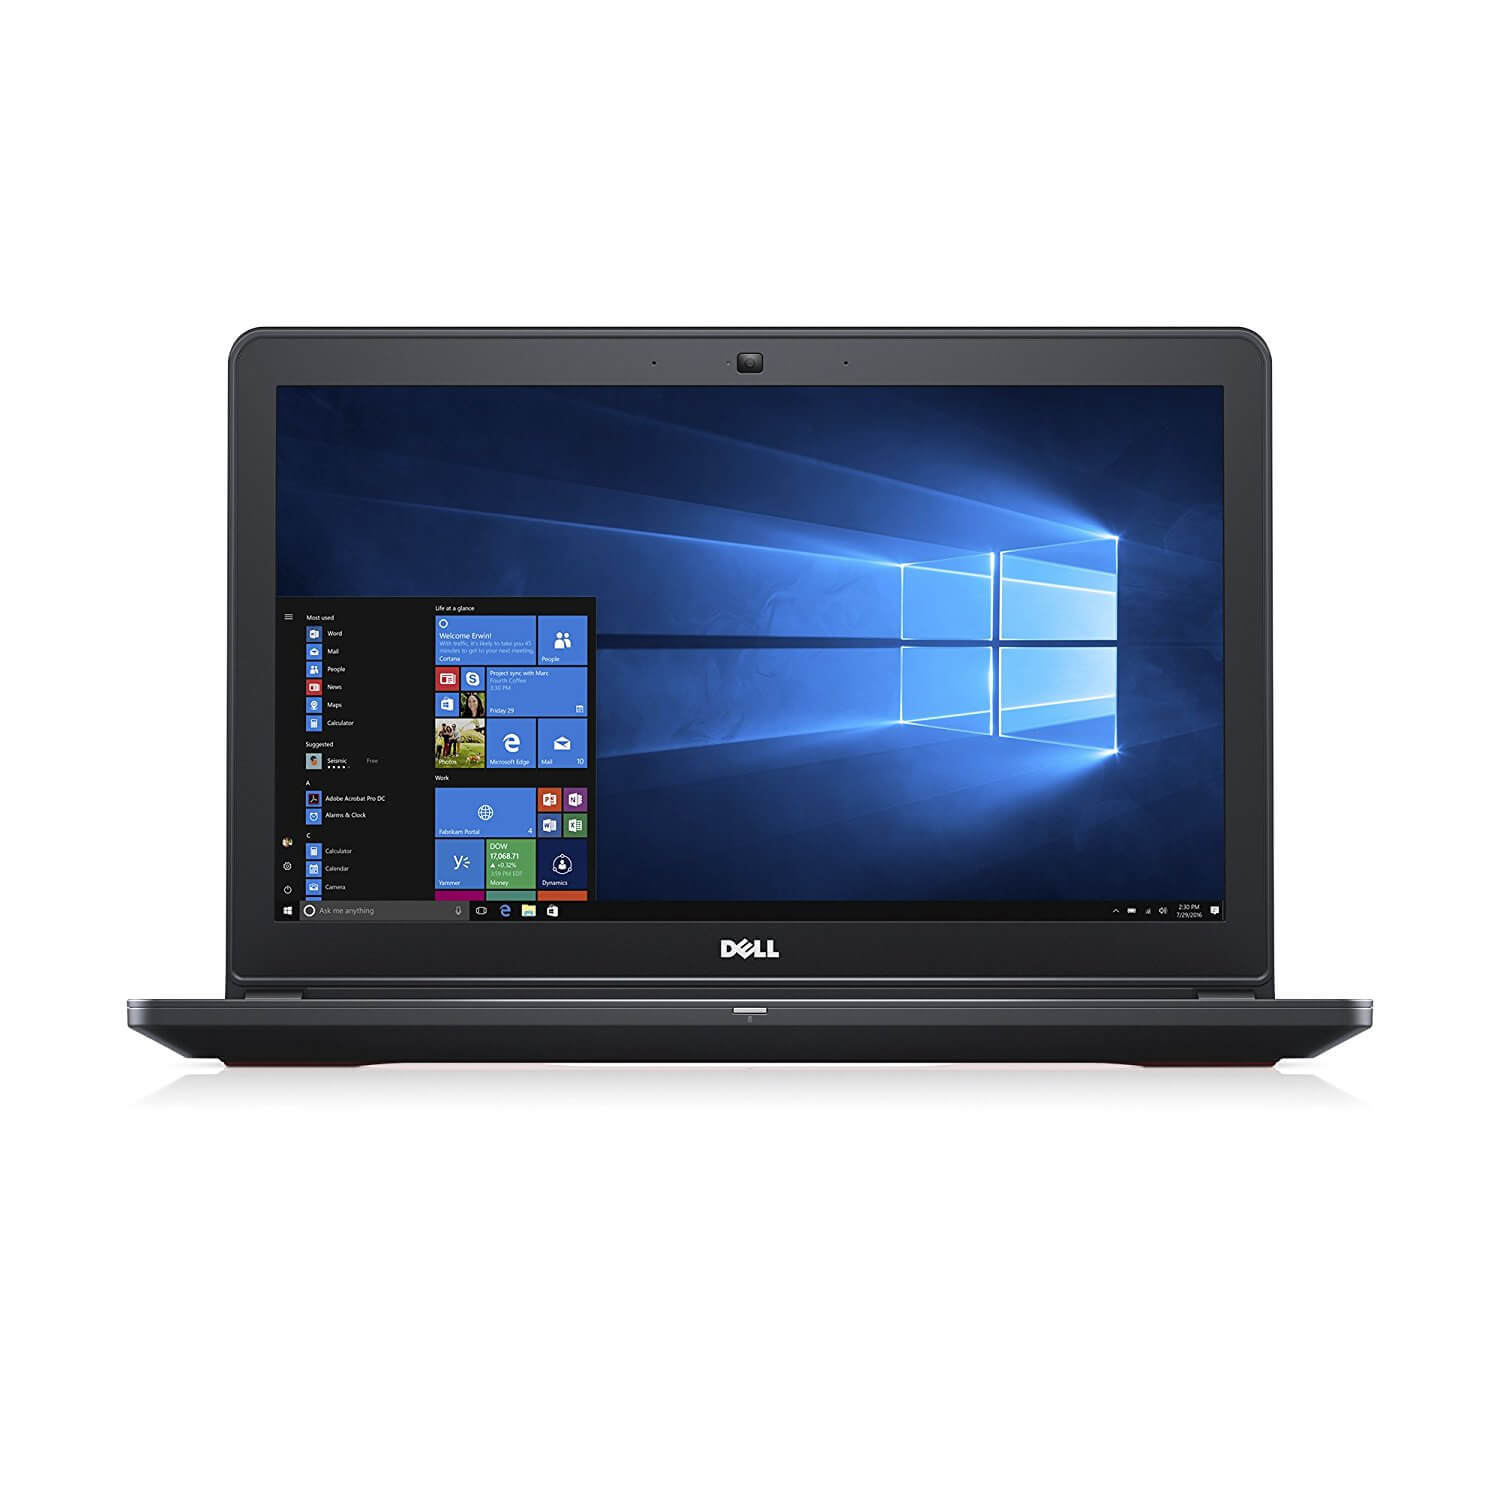 Dell Inspiron 5000 Series Gaming 15.6-inch laptop